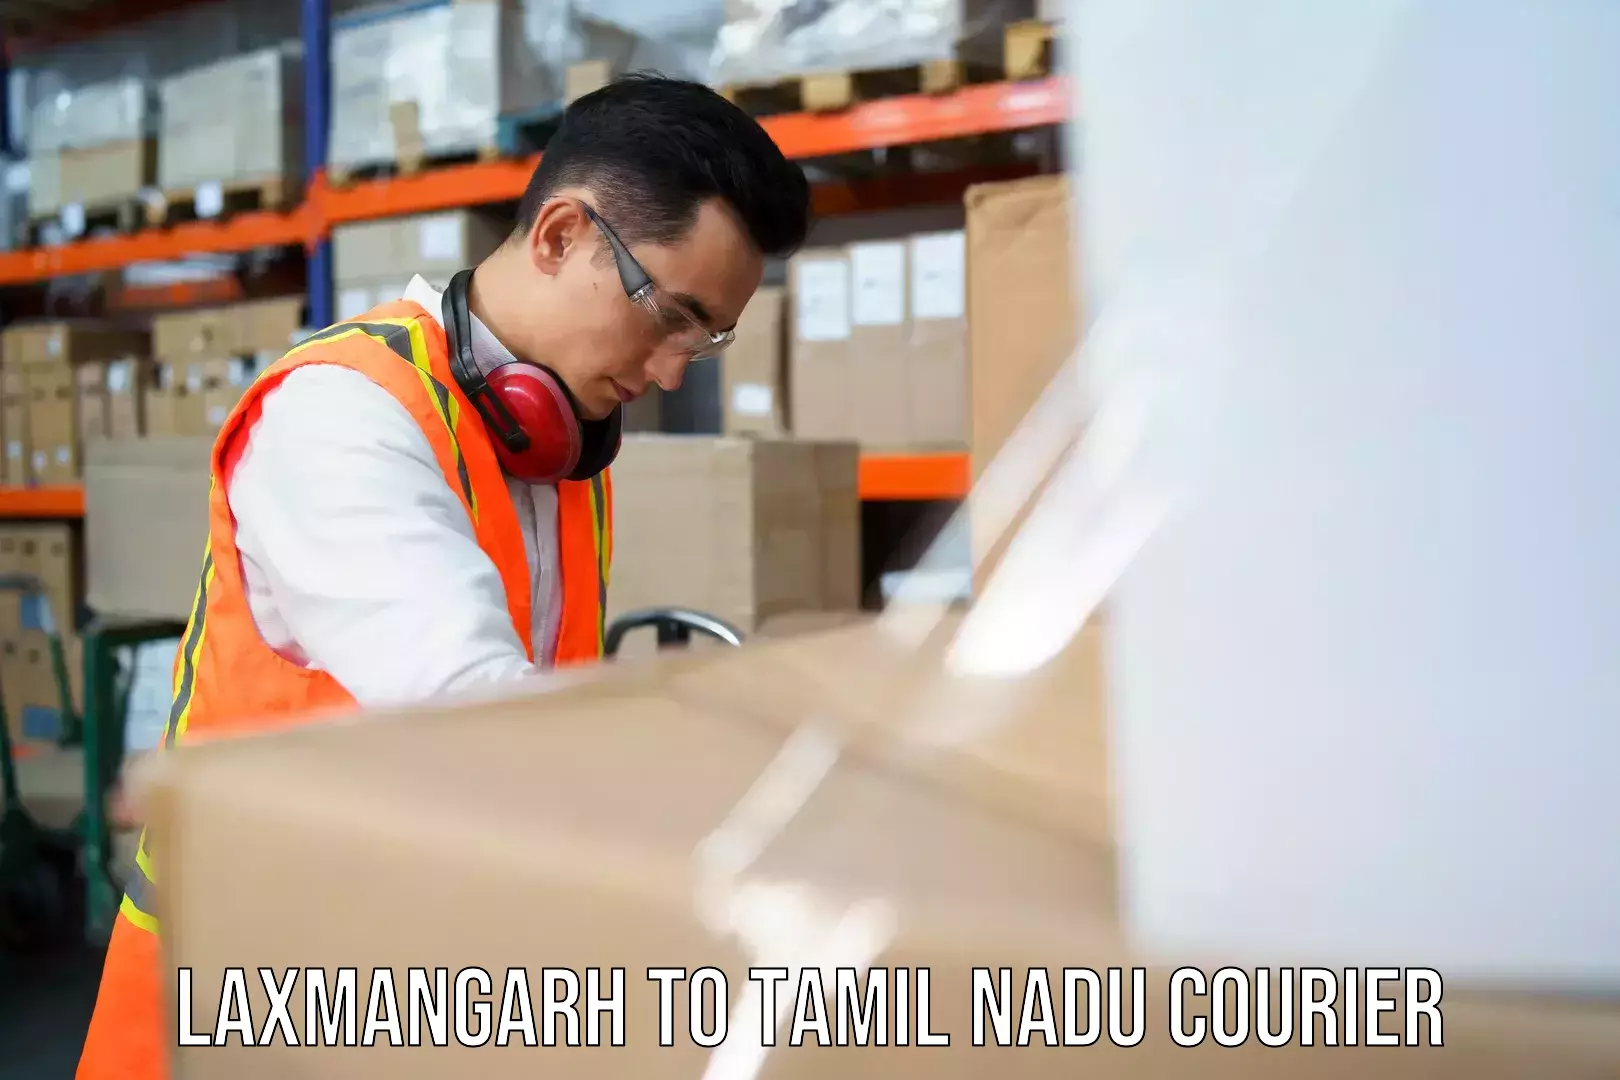 State-of-the-art courier technology Laxmangarh to Dindigul